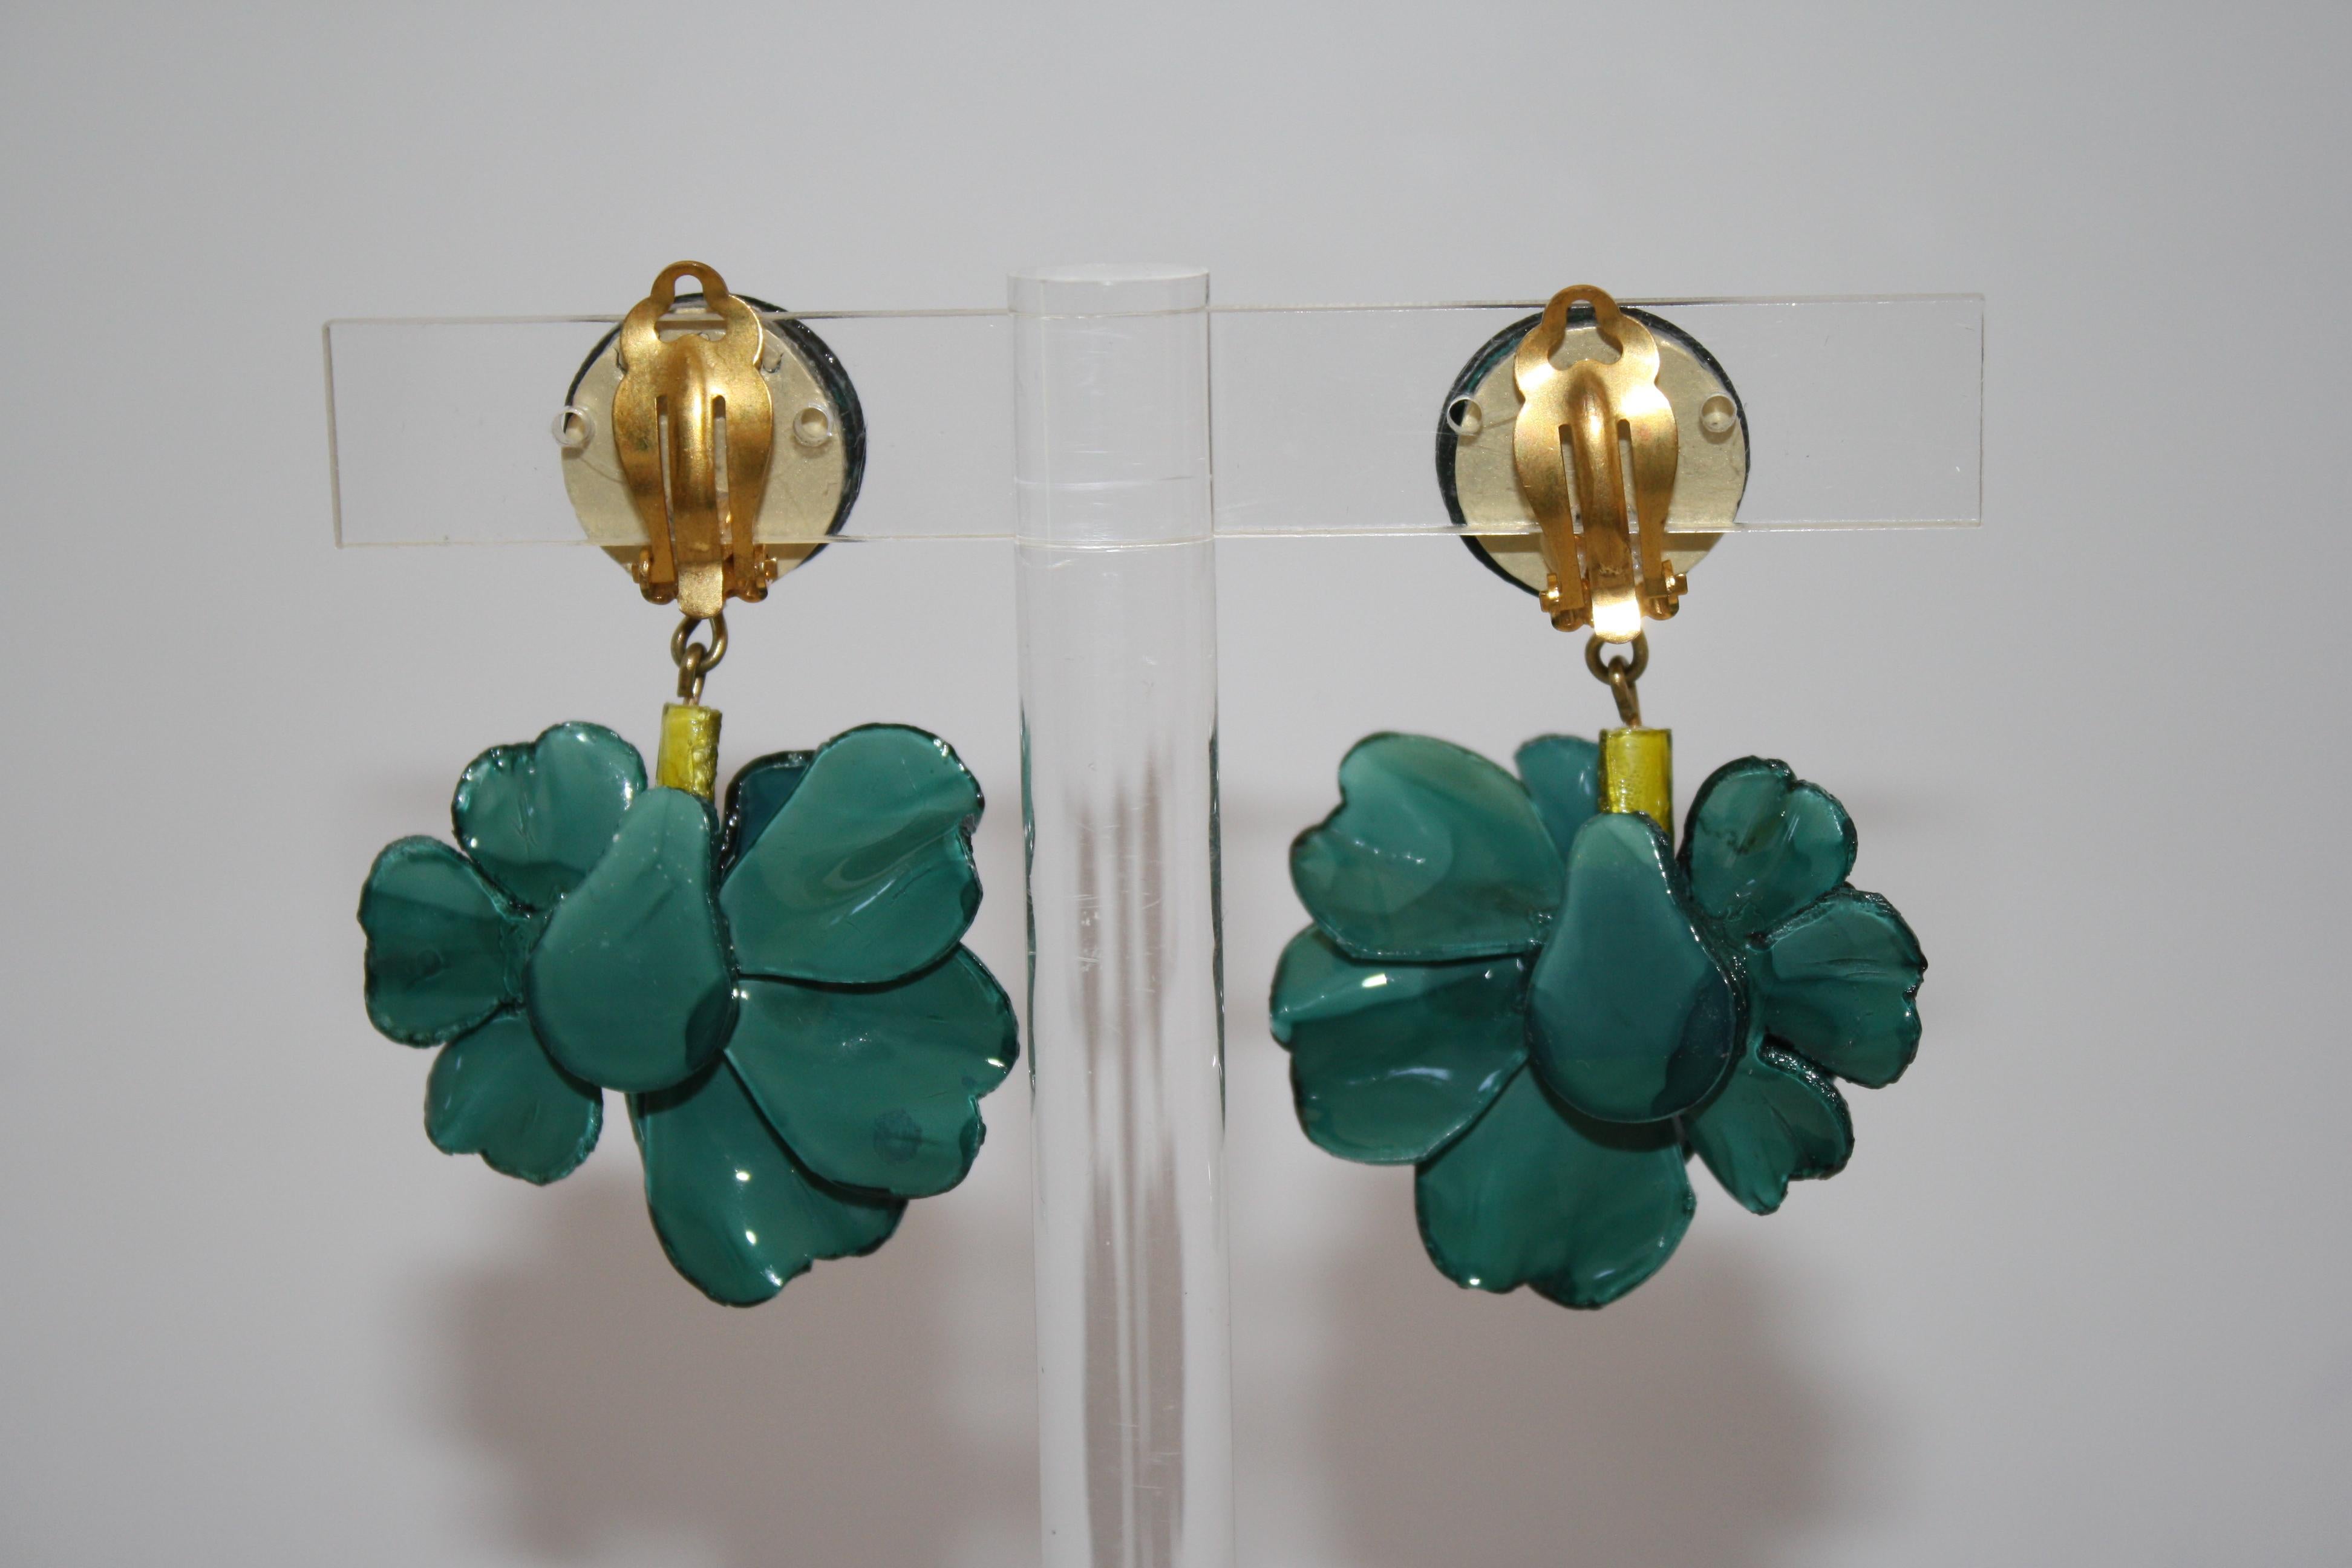 Handmade peacock green resin earrings from Cilea Paris. These earrings add dimension to any look with two flowers side by side on the same ear. Lightweight!